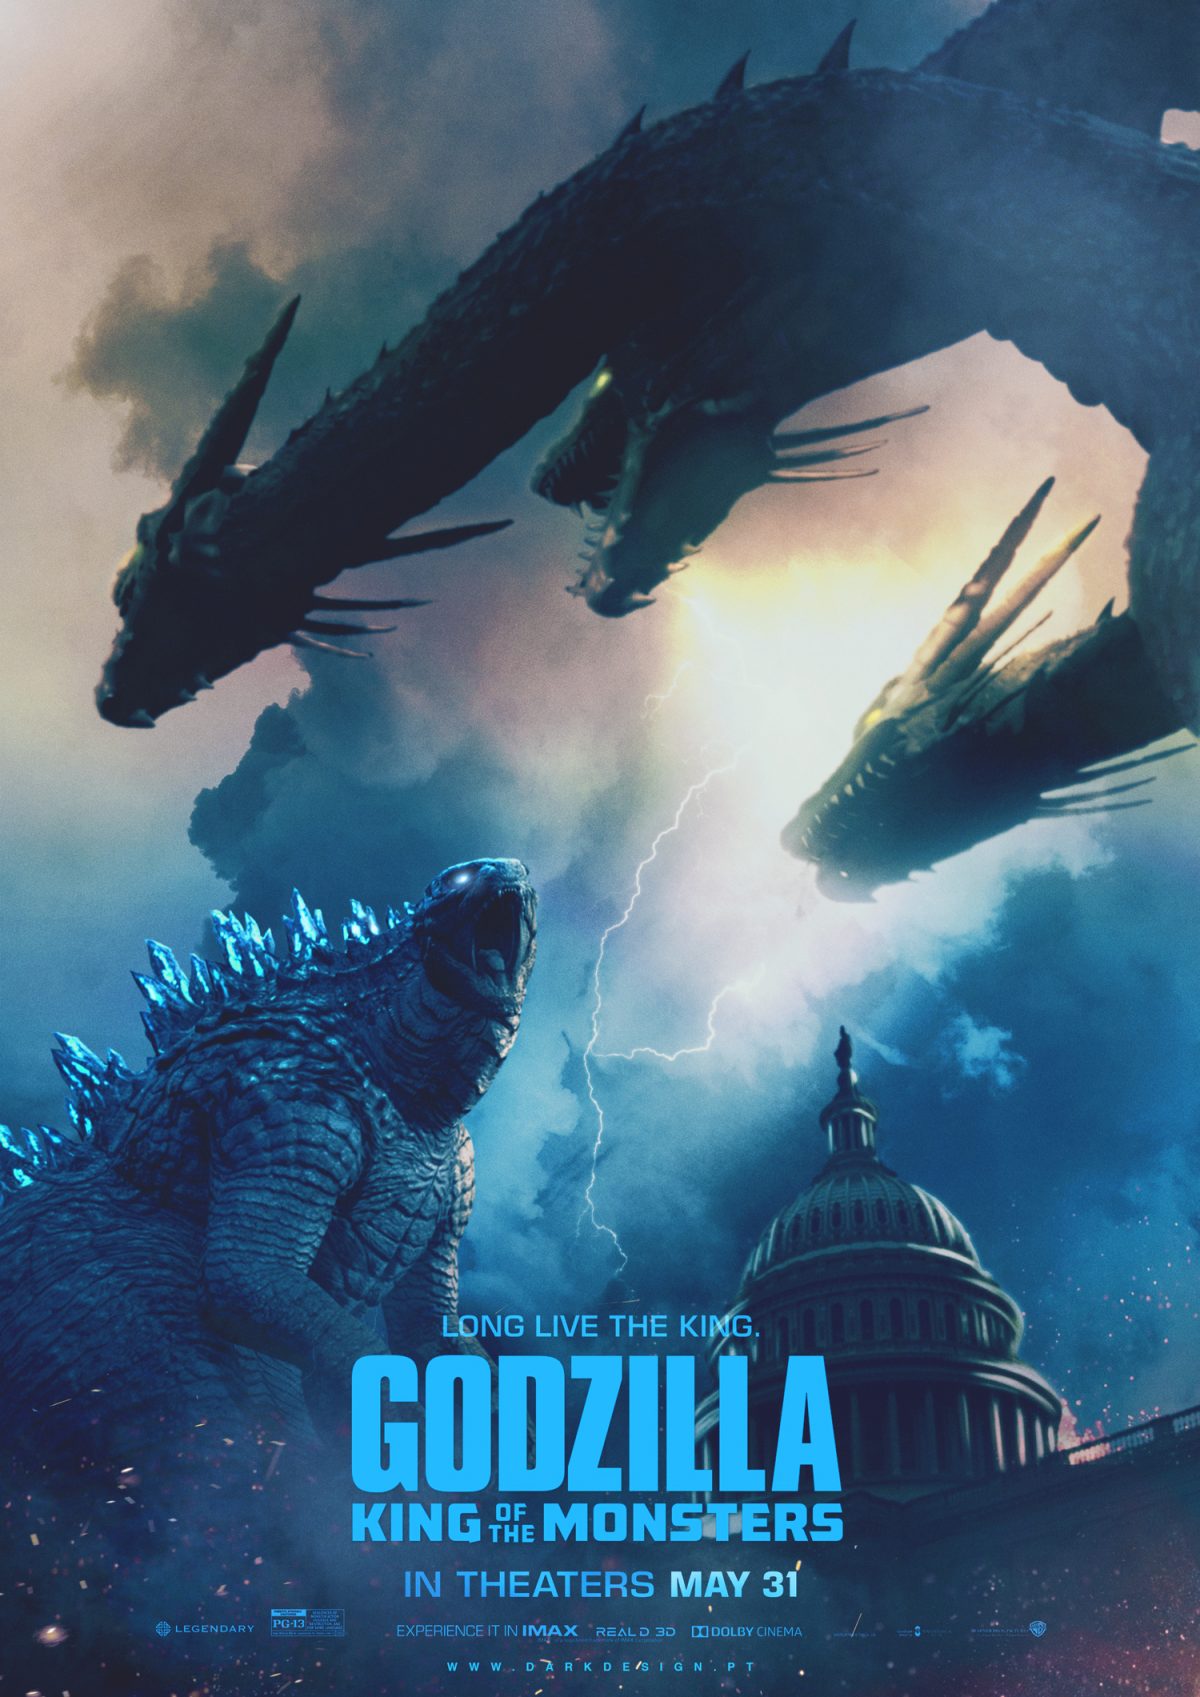 Godzilla:King Of The Monsters | Darkdesign | PosterSpy